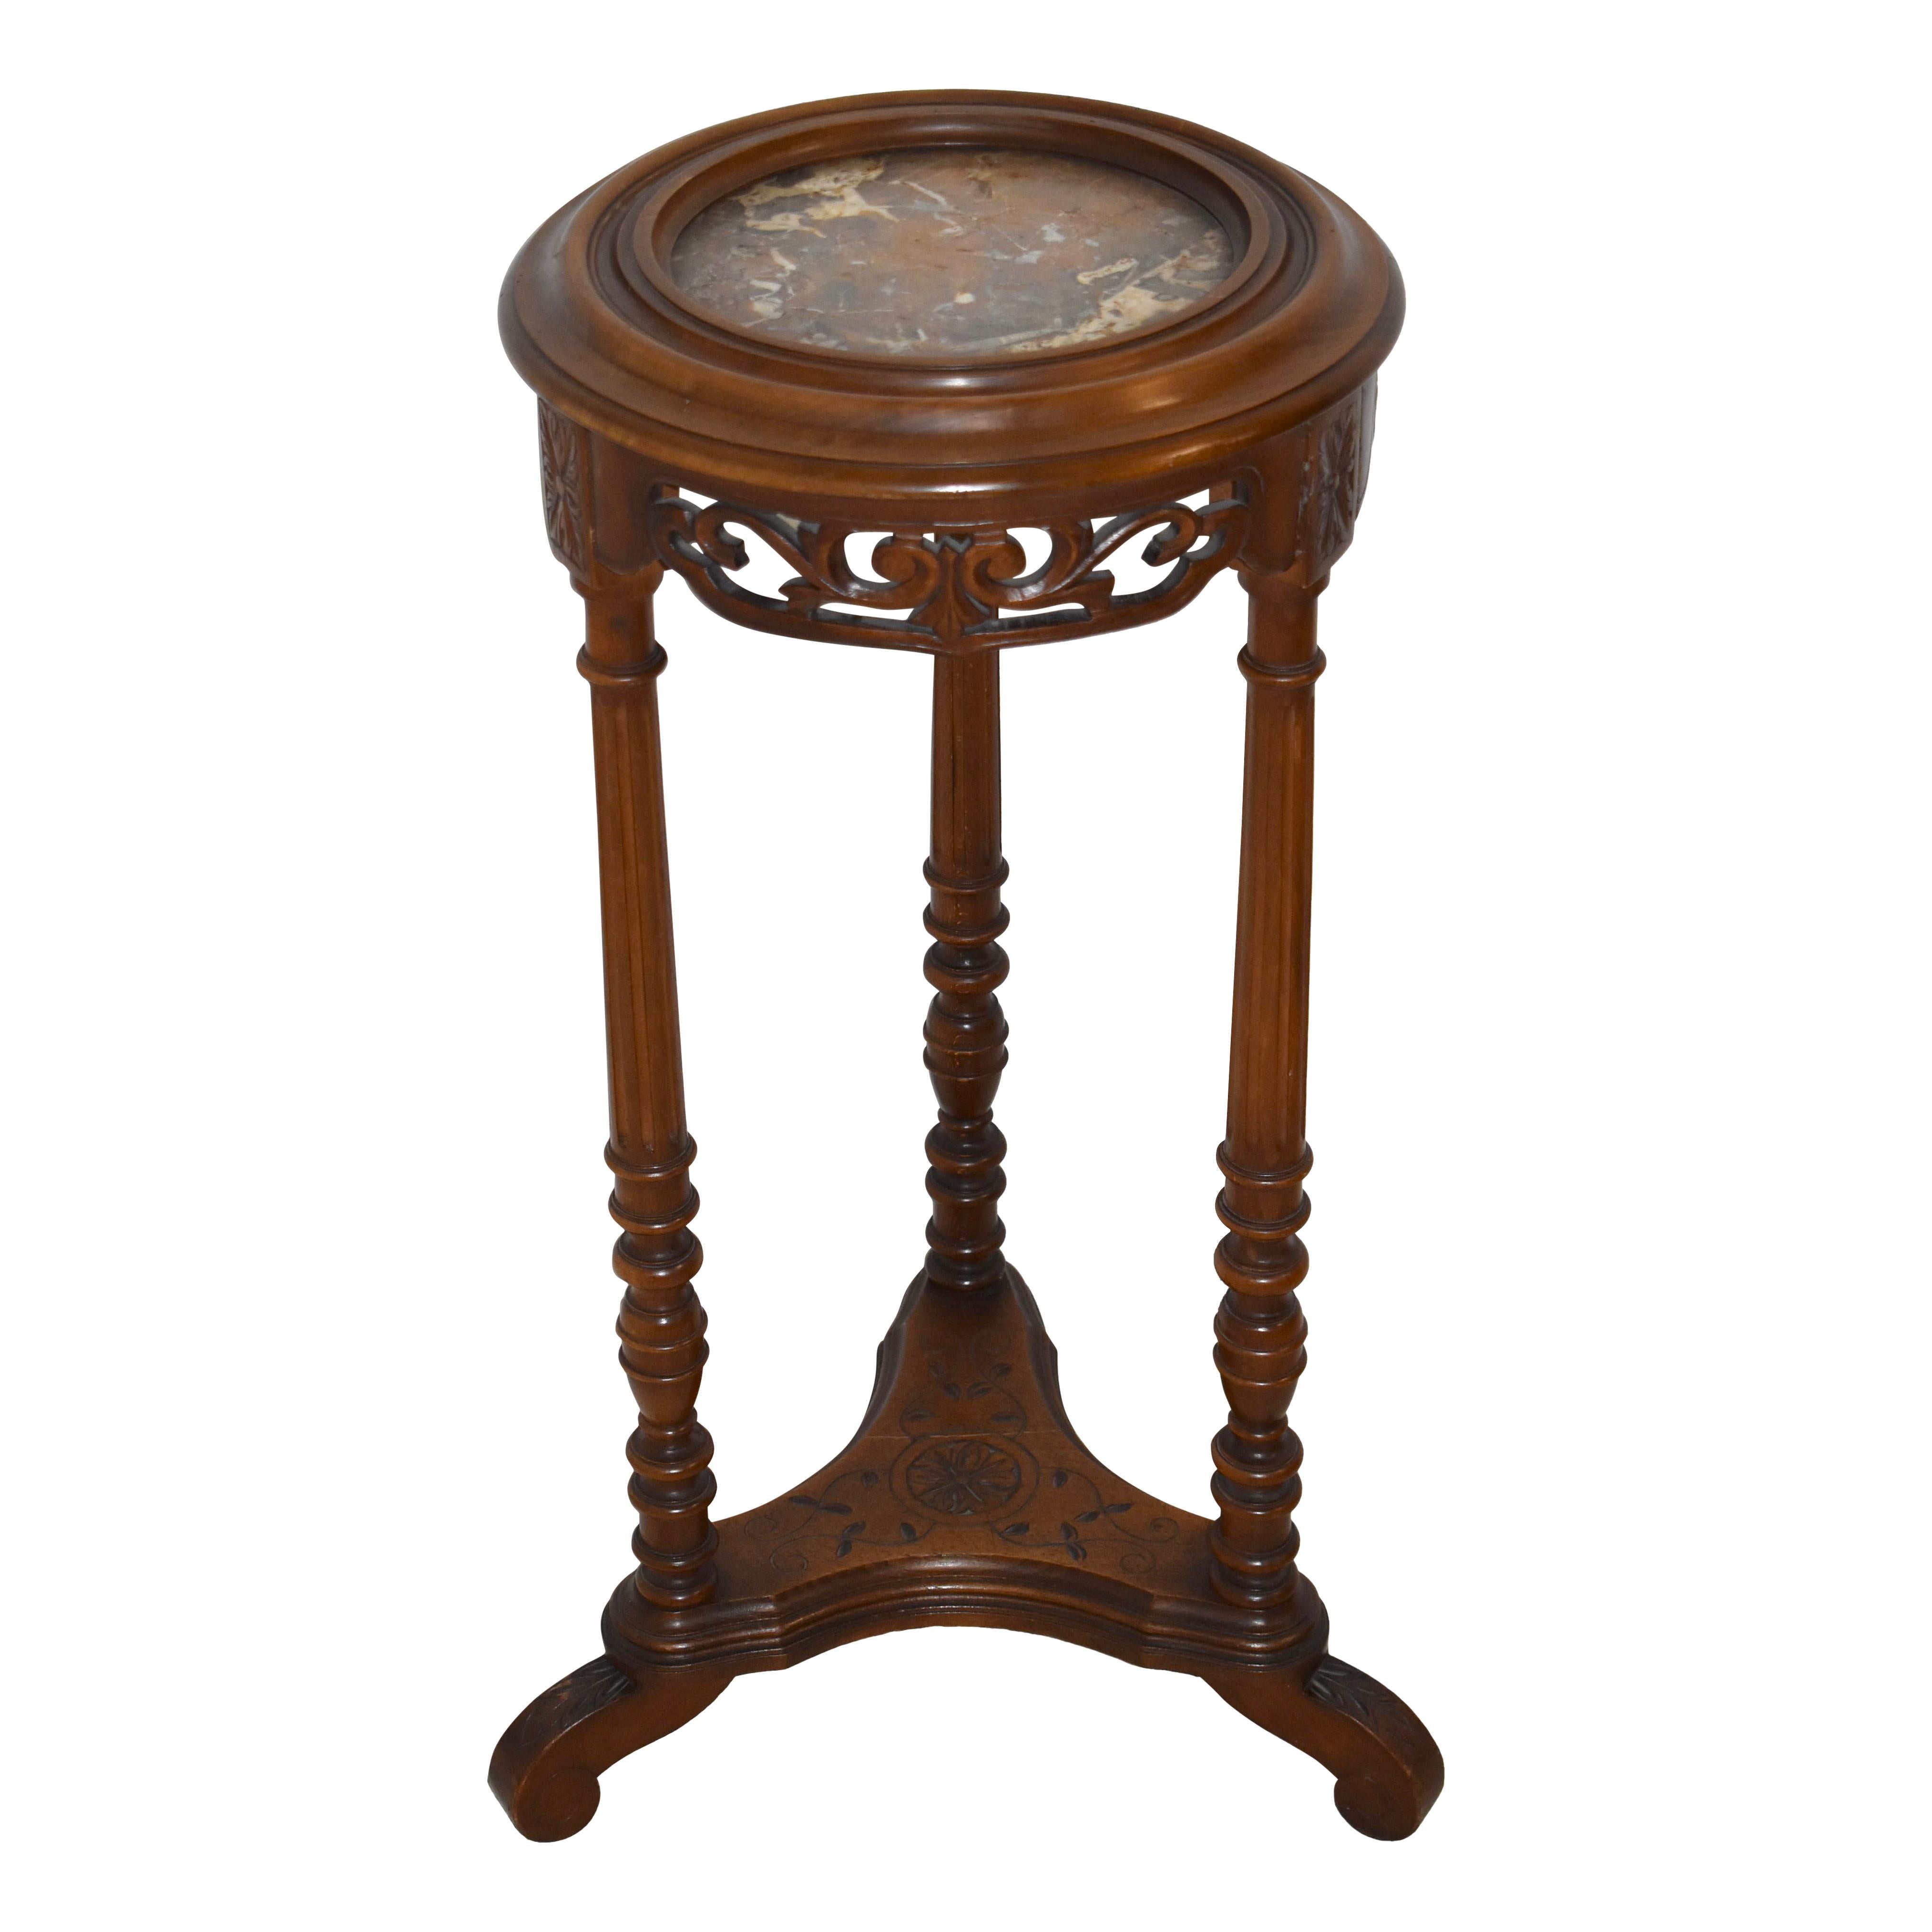 Carved French Mahogany Side Tables/Candle Stands with Marble Tops, Set of 2, circa 1900 For Sale